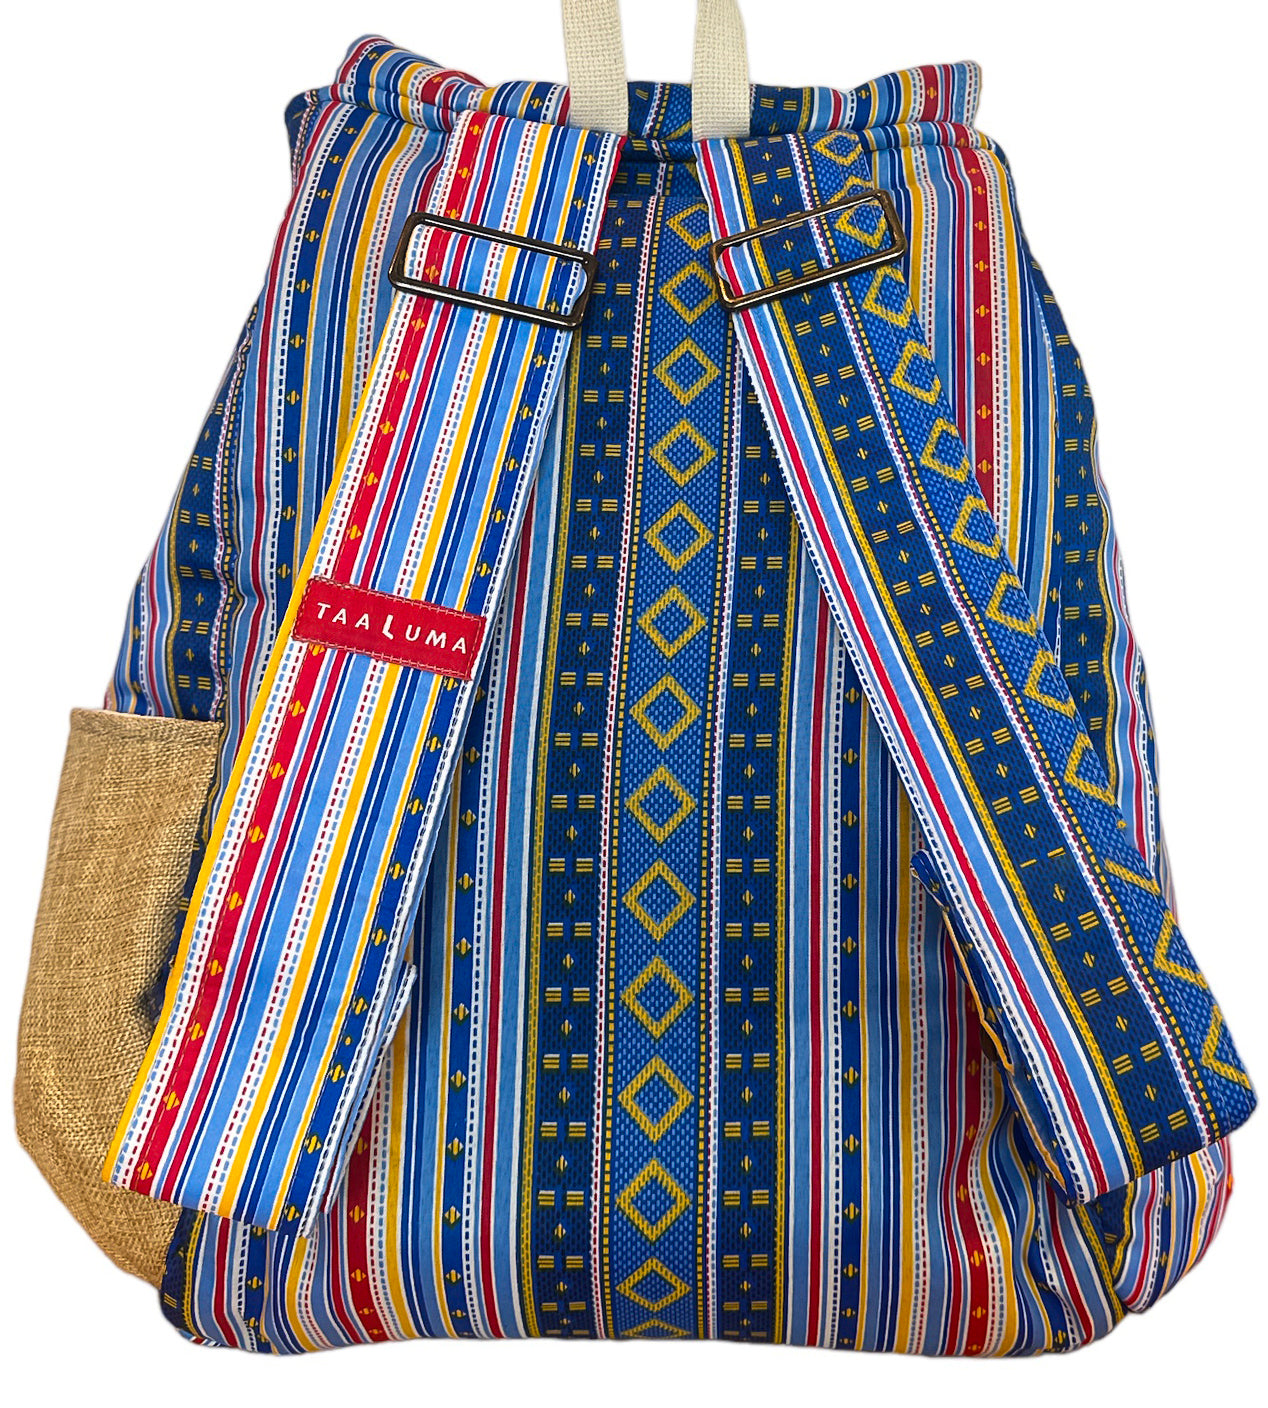 Philippines Tote (by Rebecca Wong)